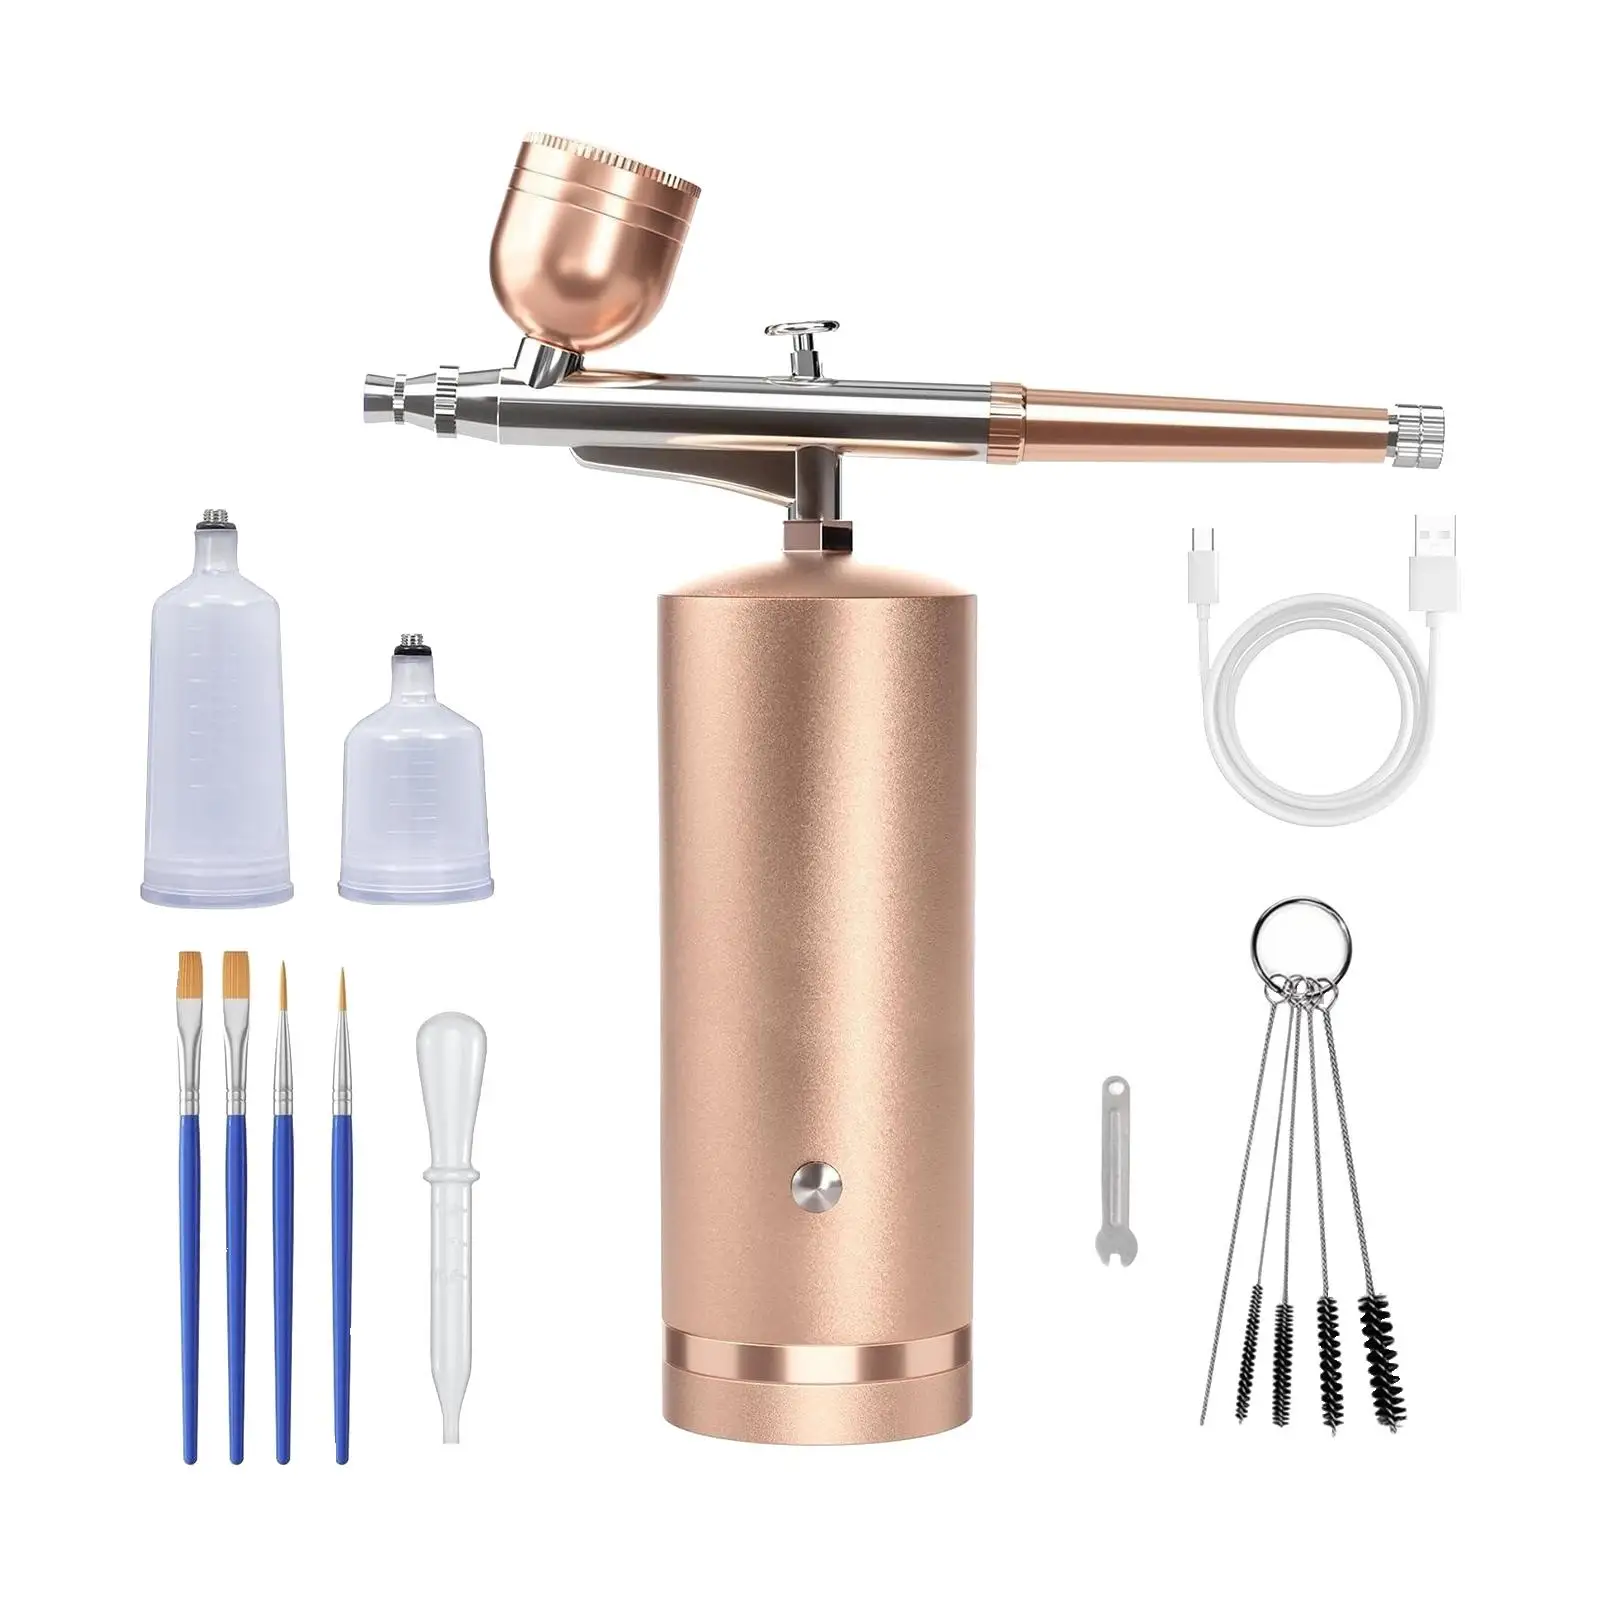 Auto Airbrush Kits with Compressor Portable Barber Airbrush Compressor for Painting Barber Models Art Painting Cake Decorating